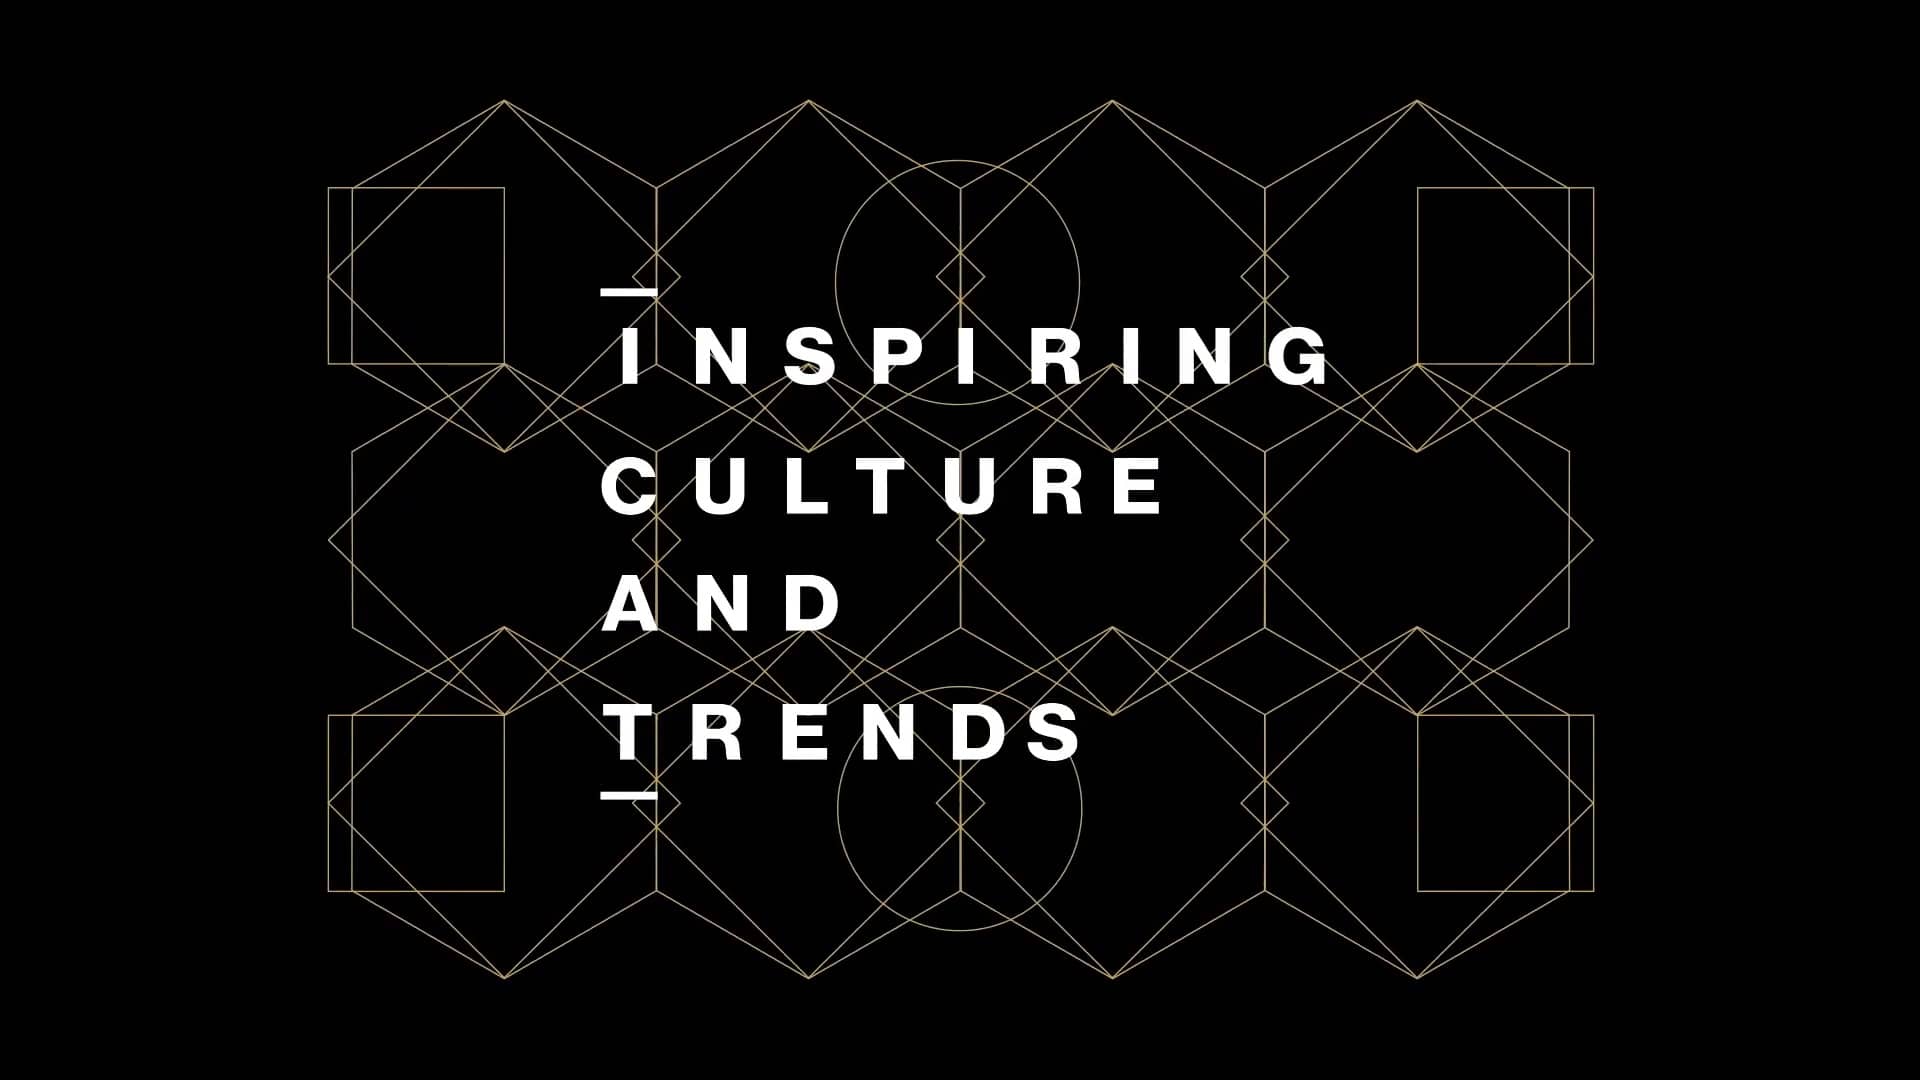 Inspiring culture and trends